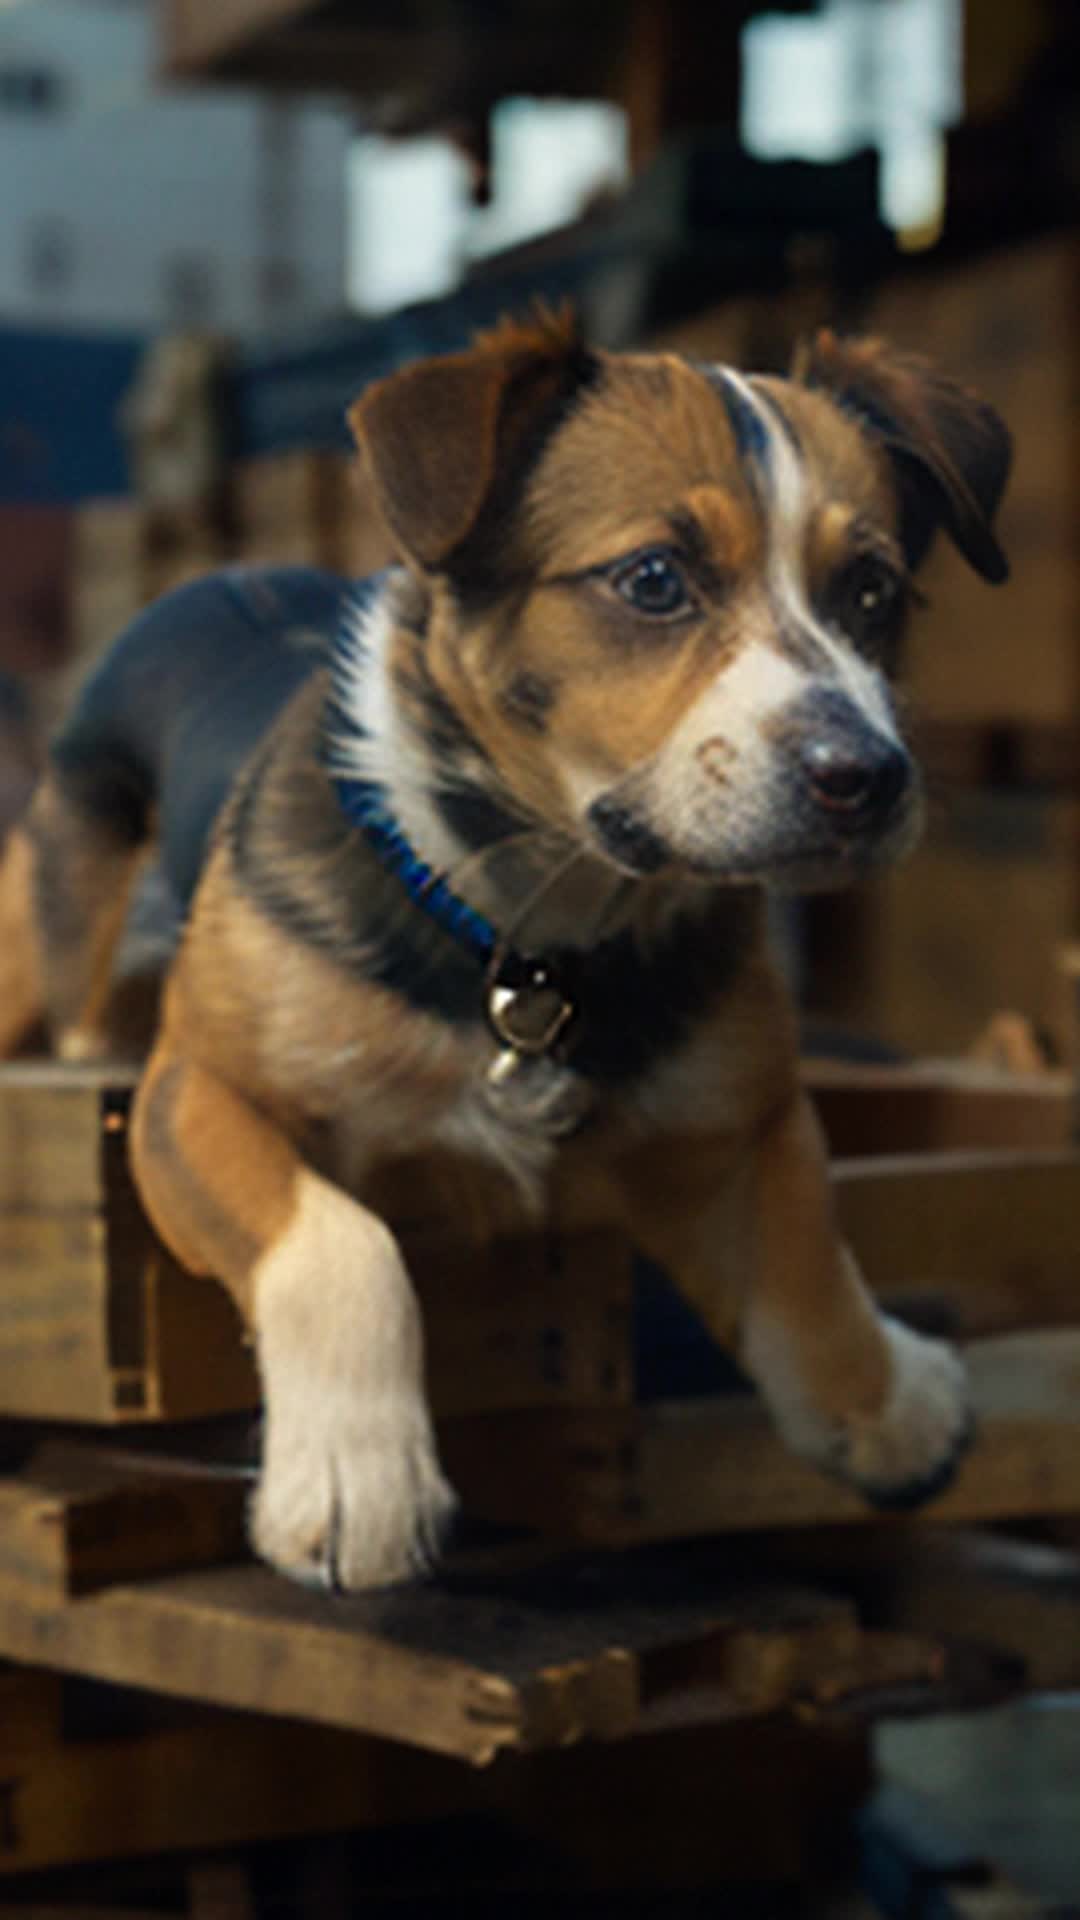 Energetic puppy, Barkley, races through cargo ship crates, gleaming eyes, thrill of adventure, dynamic movement, background of sea and ship details, highly detailed, sharp focus